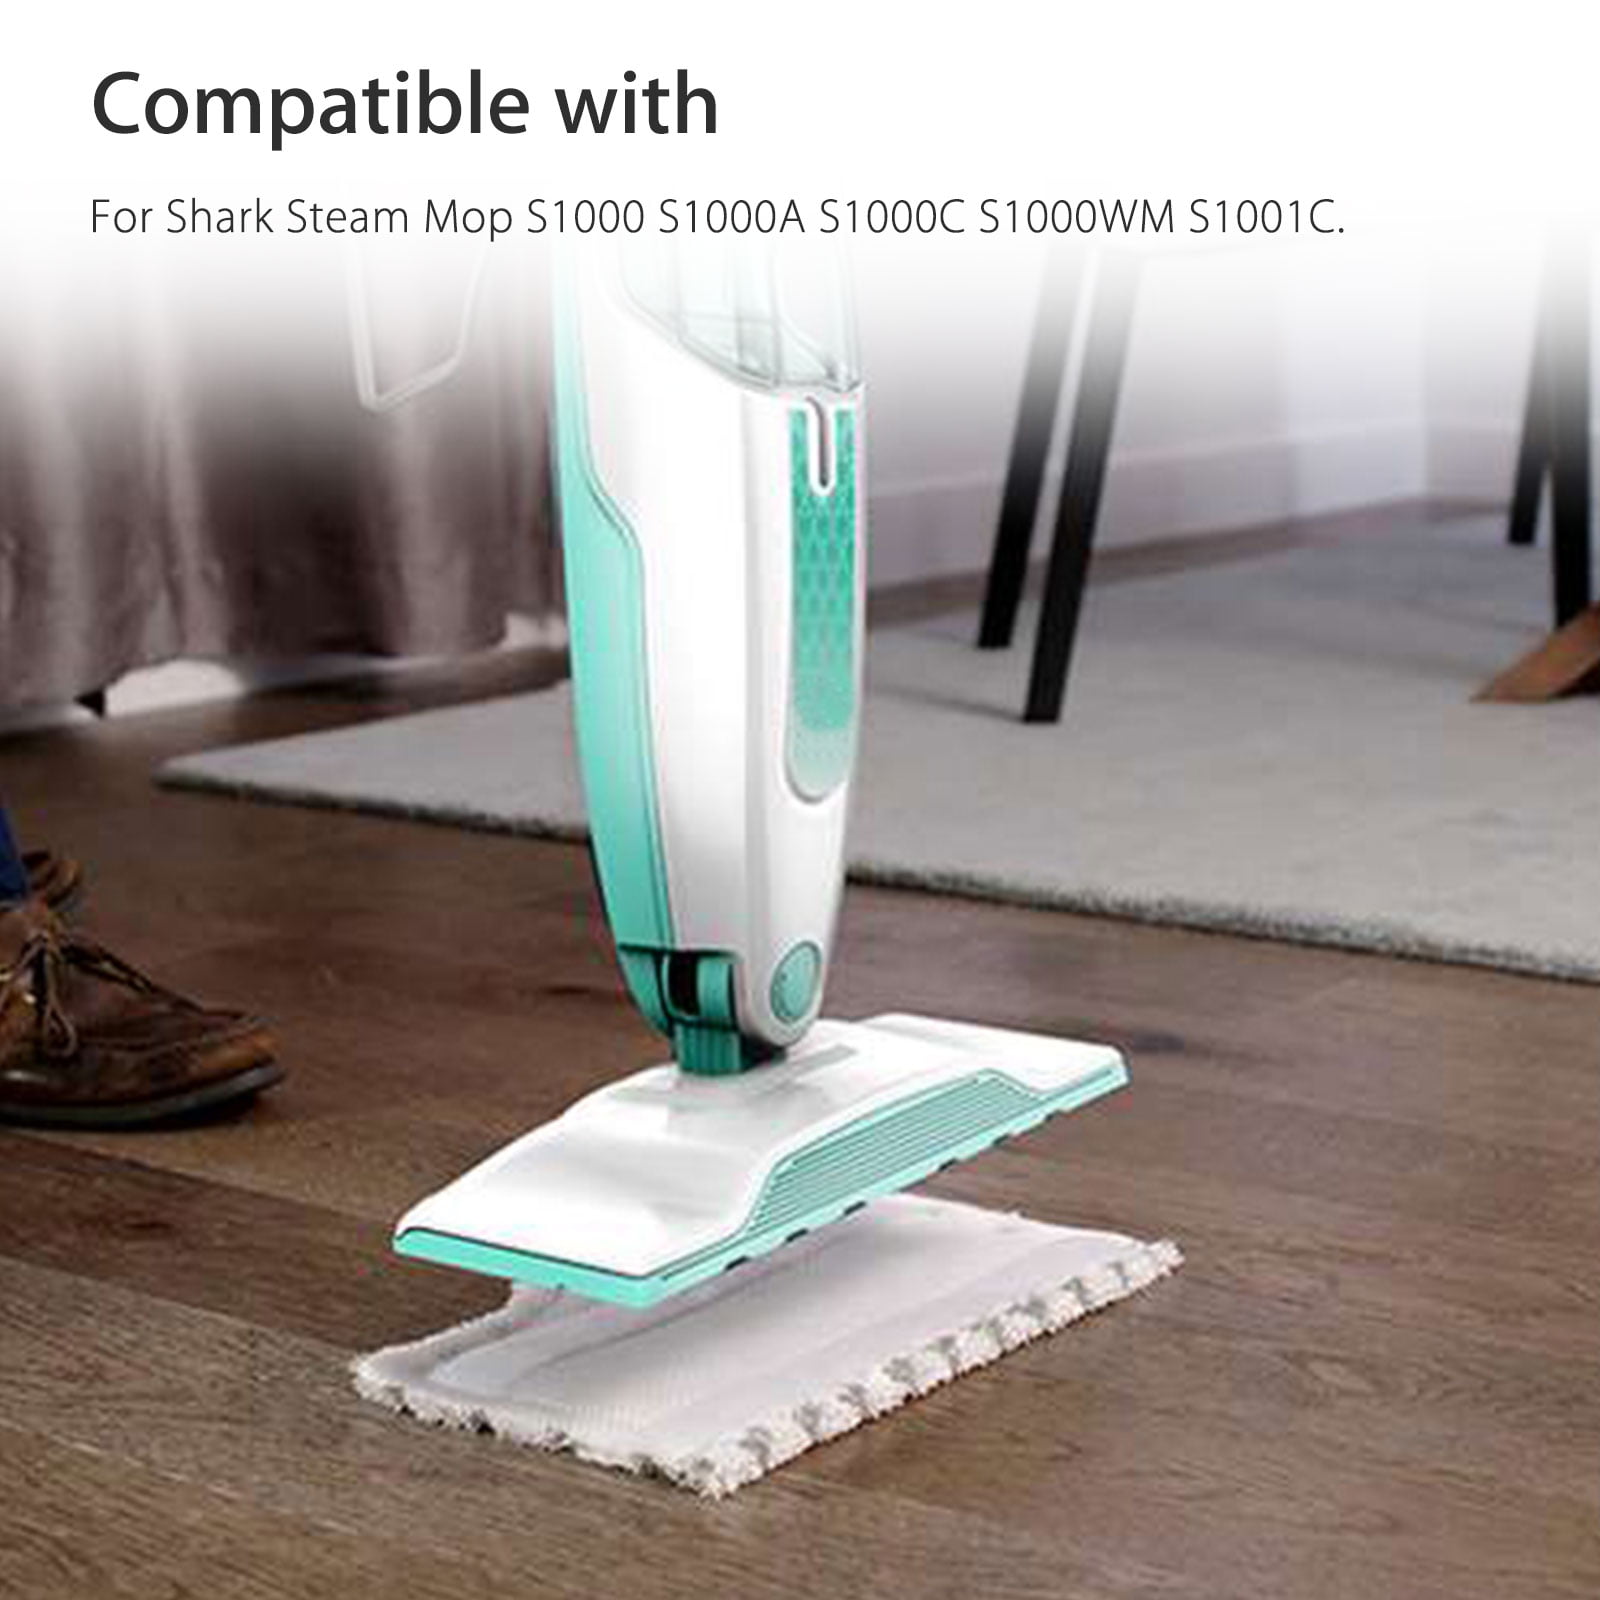 1PC Steam Mop Pads Replacement For Shark S1000A Steam Mop Floor Cleaner 